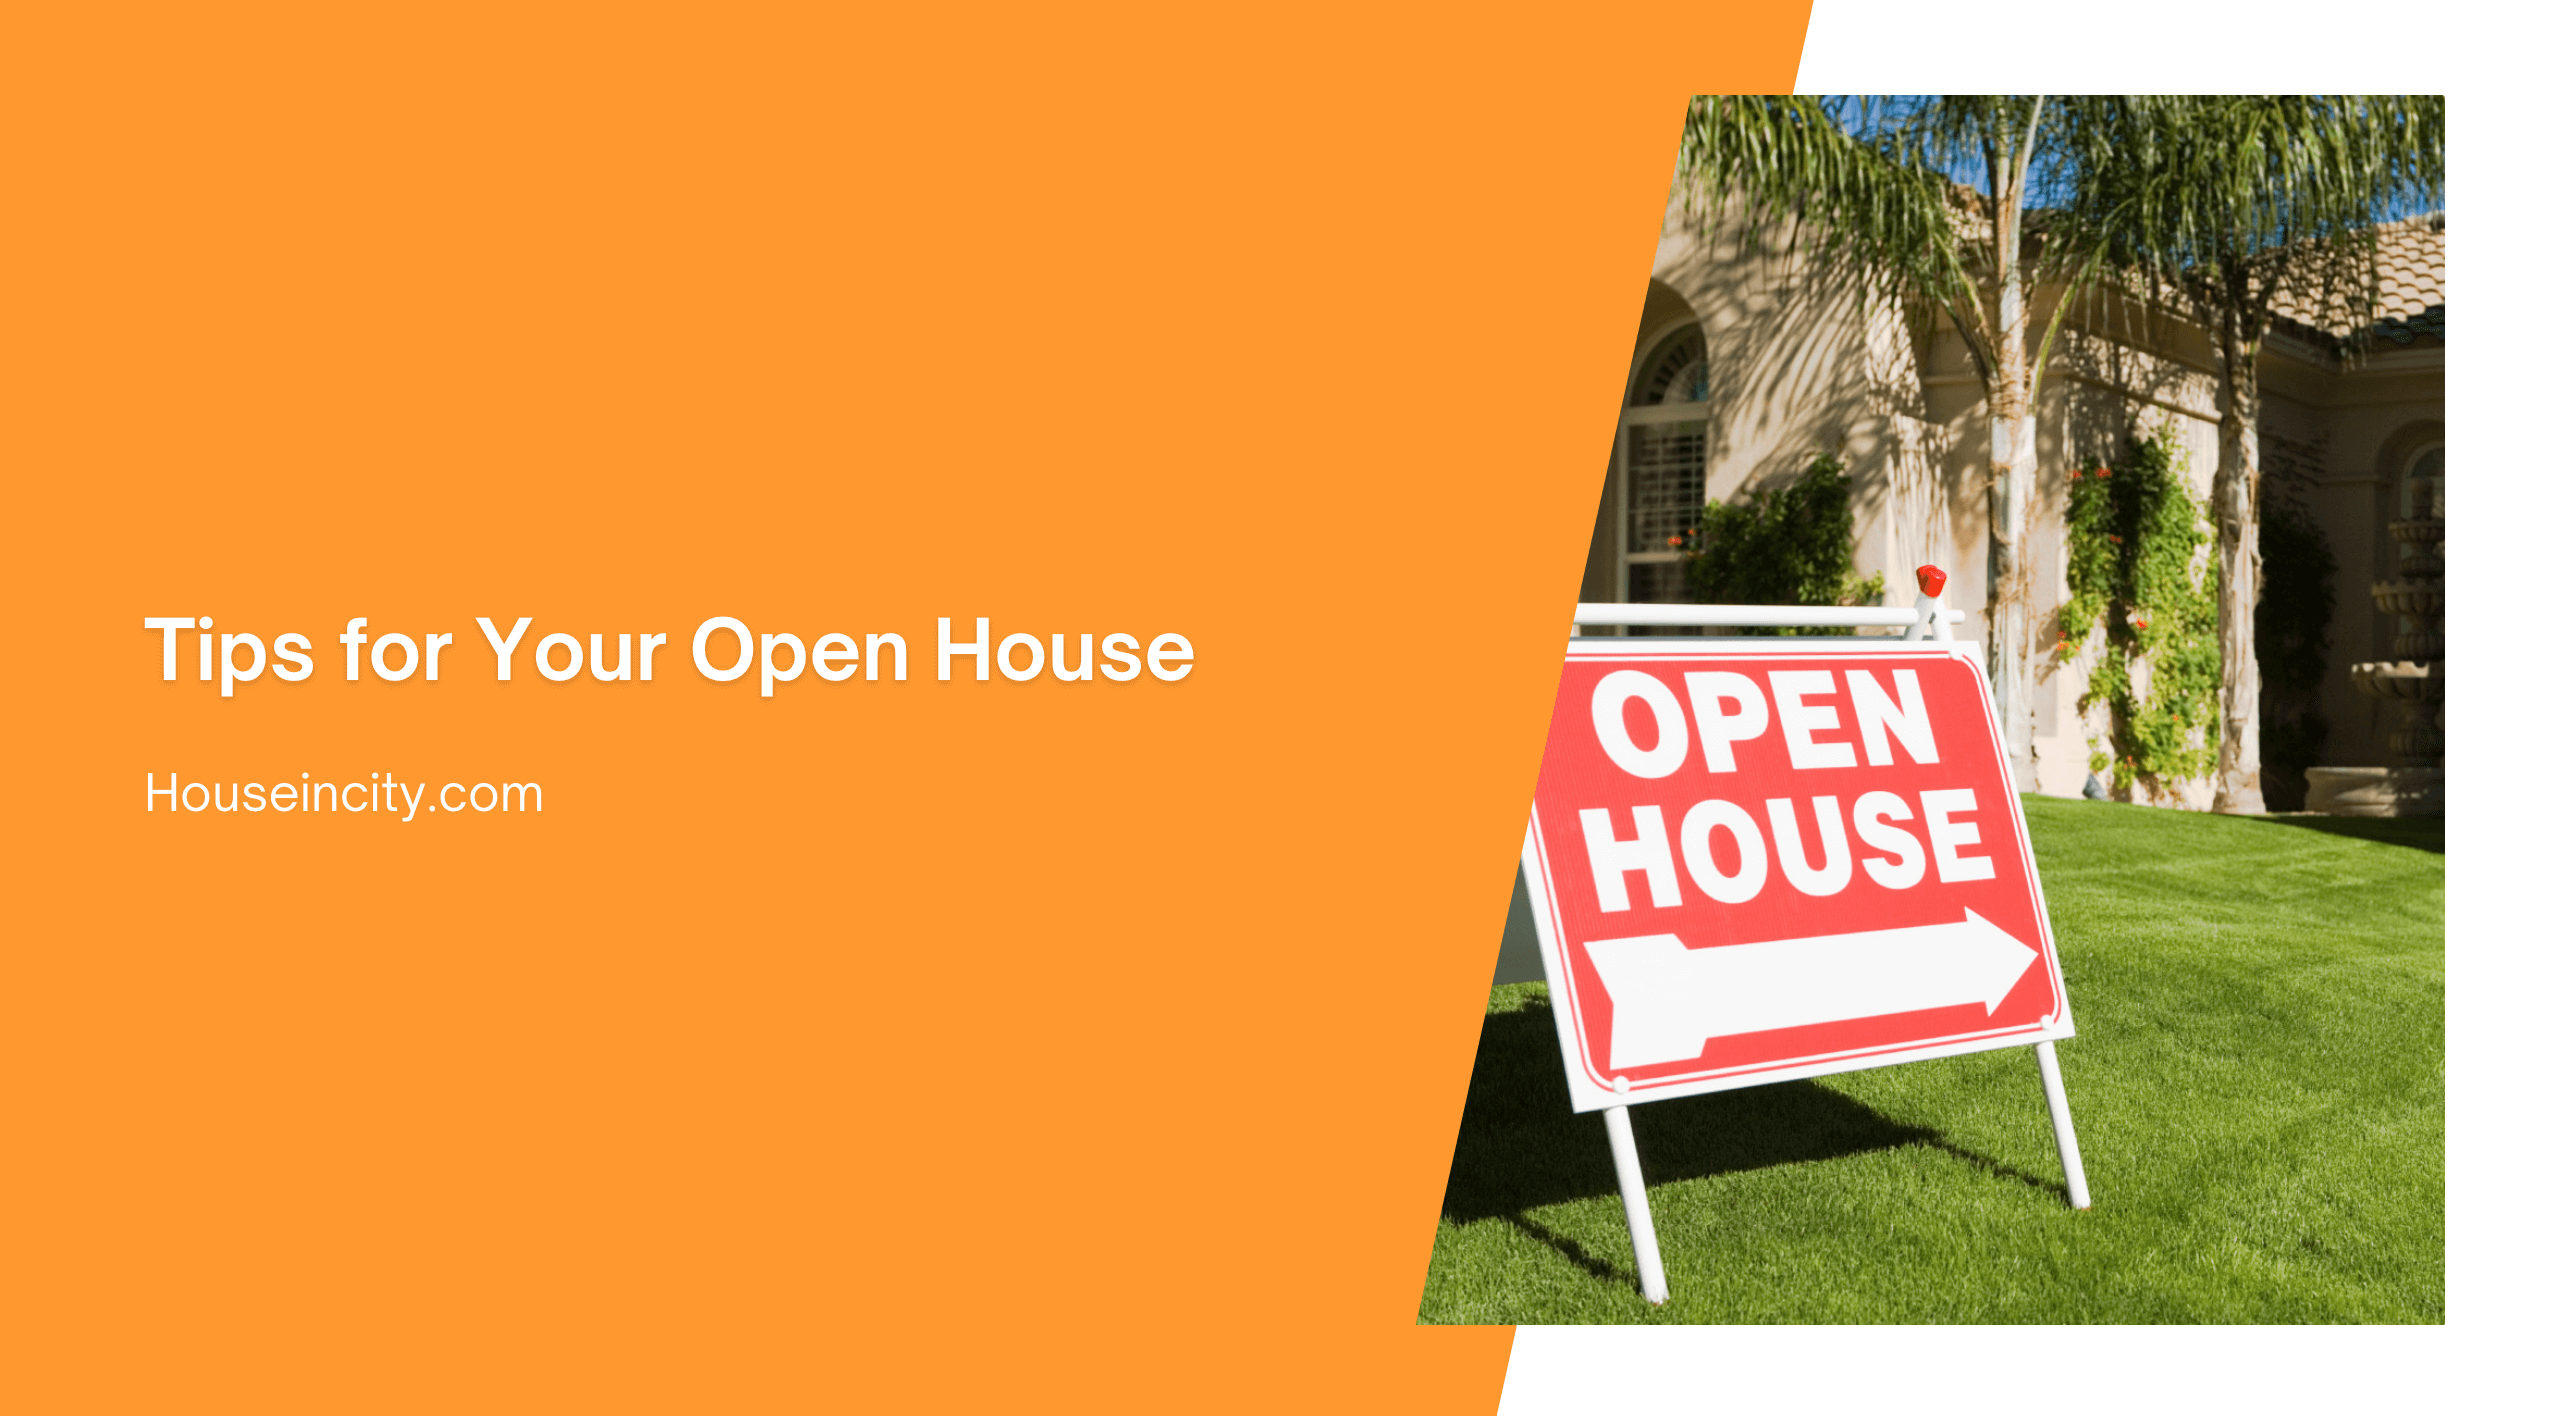 Tips for Your Open House